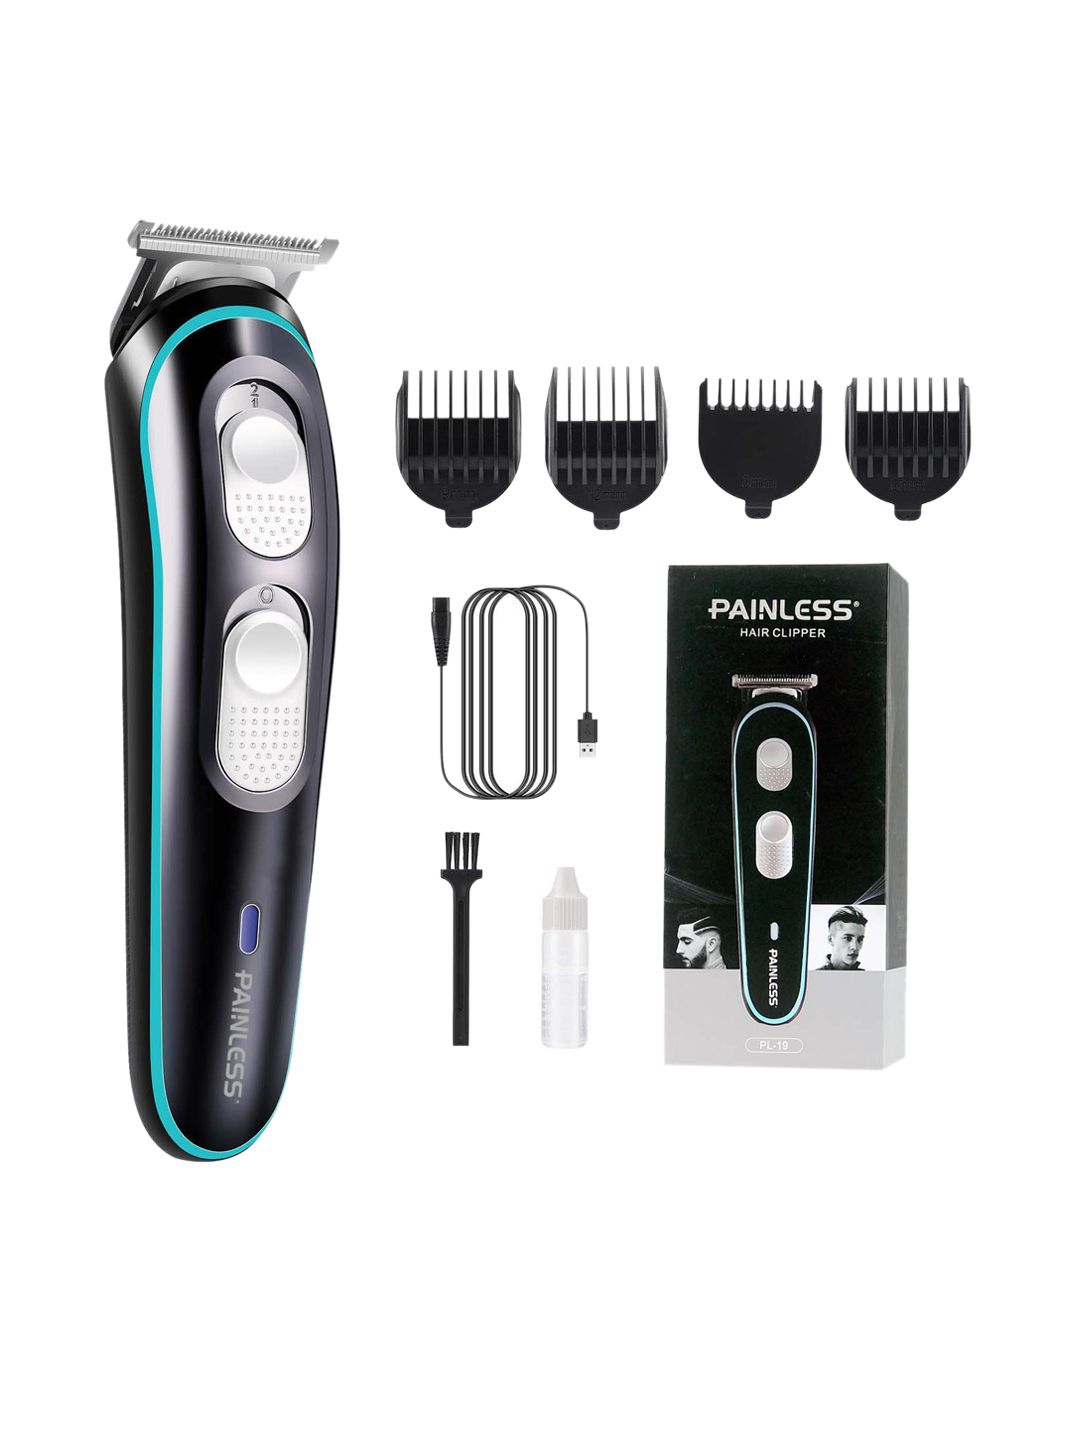 PAINLESS Black & Turquoise Blue Rechargeable Hair Trimmer Price in India